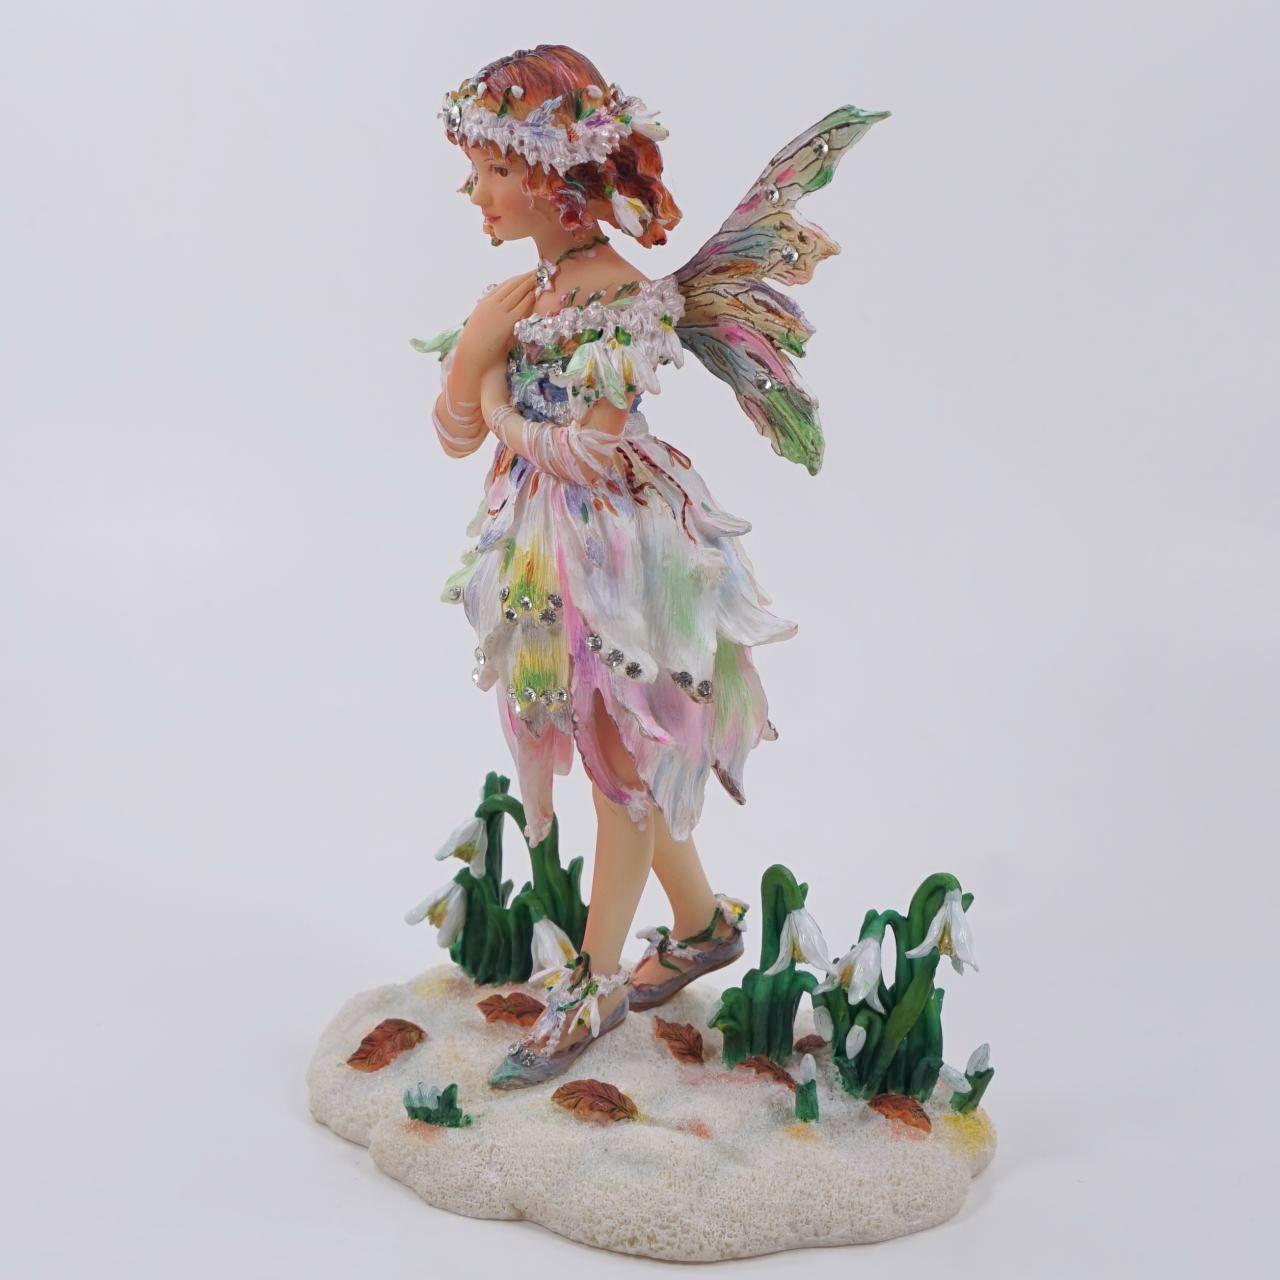 Crisalis Collection★ Early Snowdrop Faerie (1-1048) 30% OFF